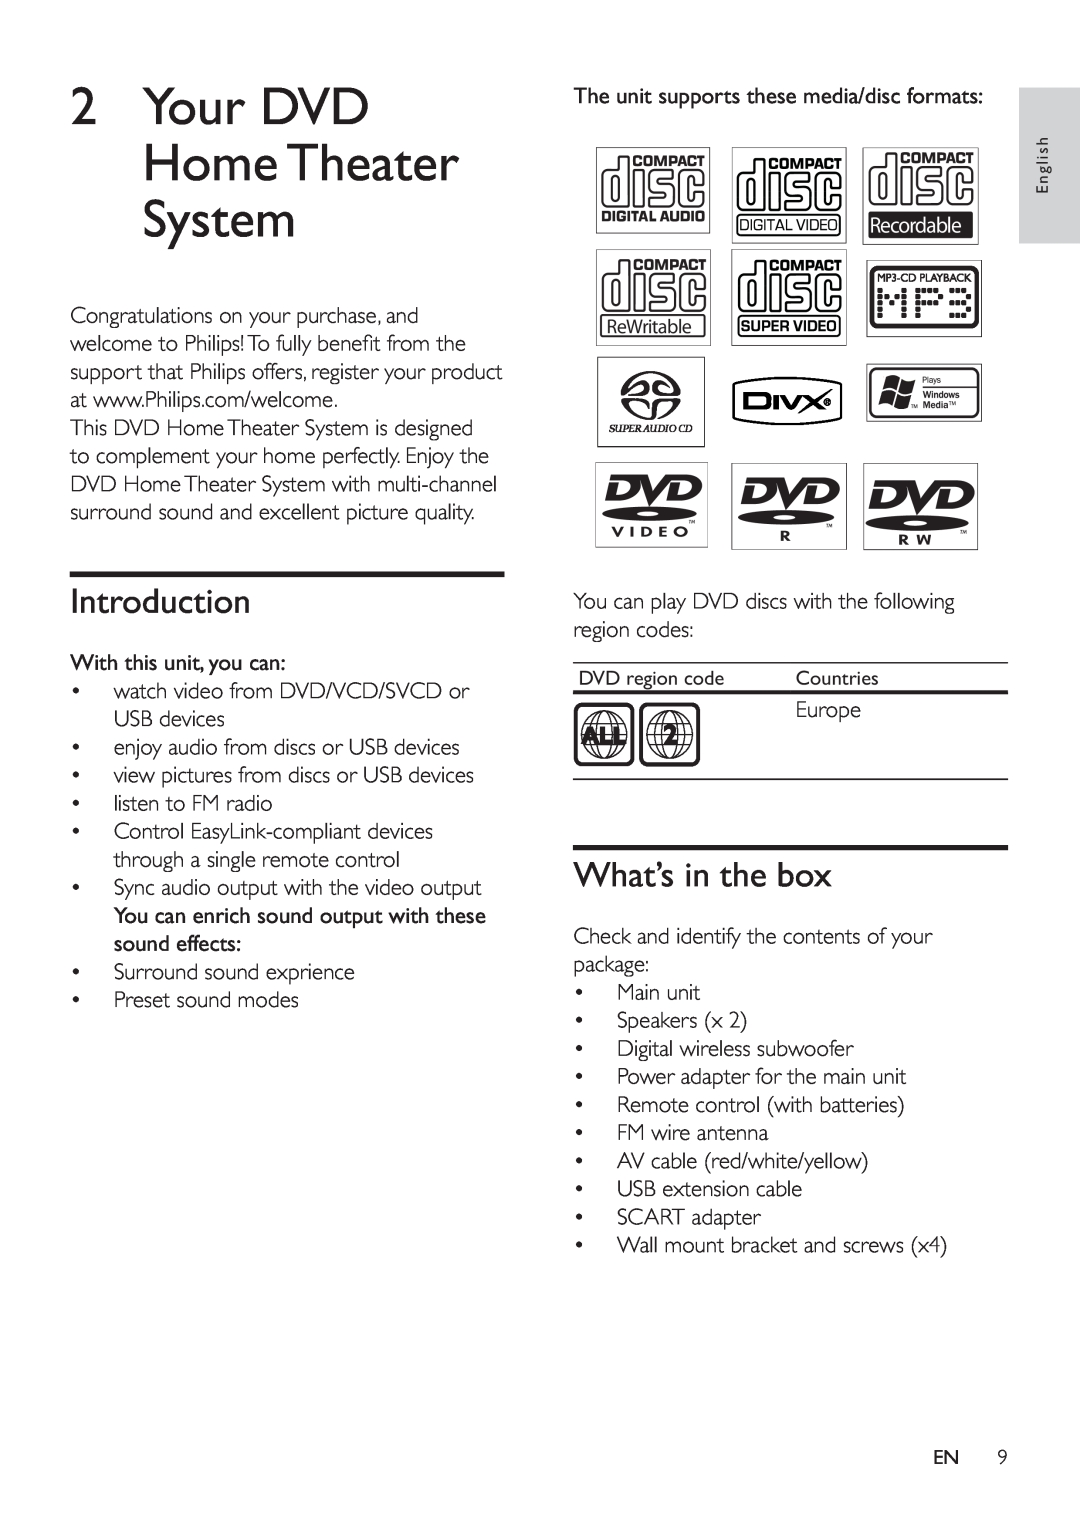 Philips HSB4383/12 user manual 2Your DVD Home Theater System, Introduction, What’s in the box, Recordable 